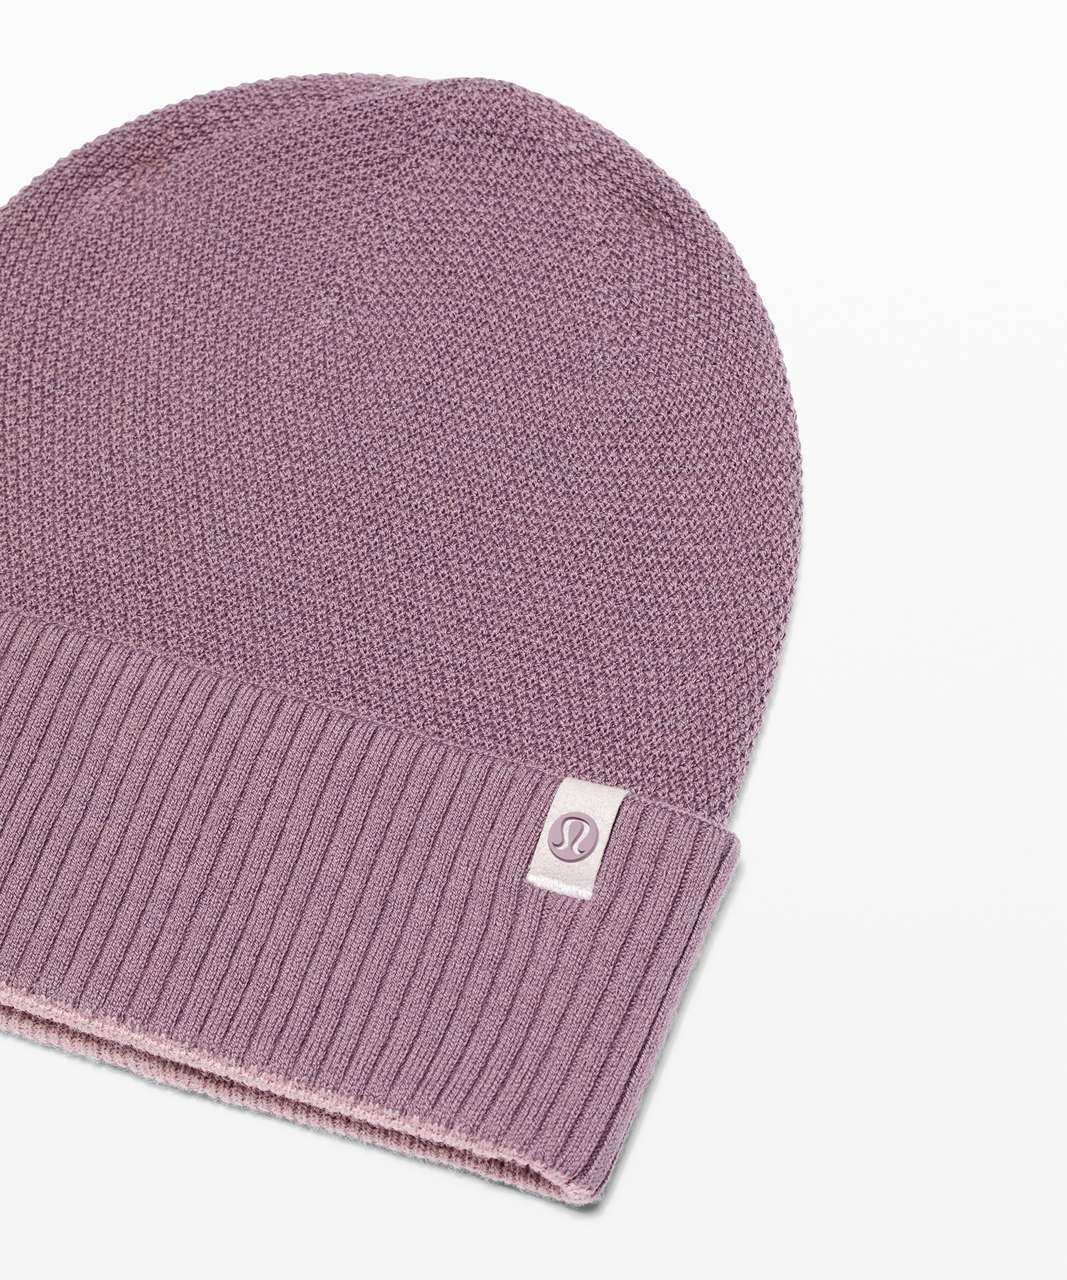 Lululemon Knit Me Up Beanie *Reversible - Frosted Mulberry / Smoky Blush